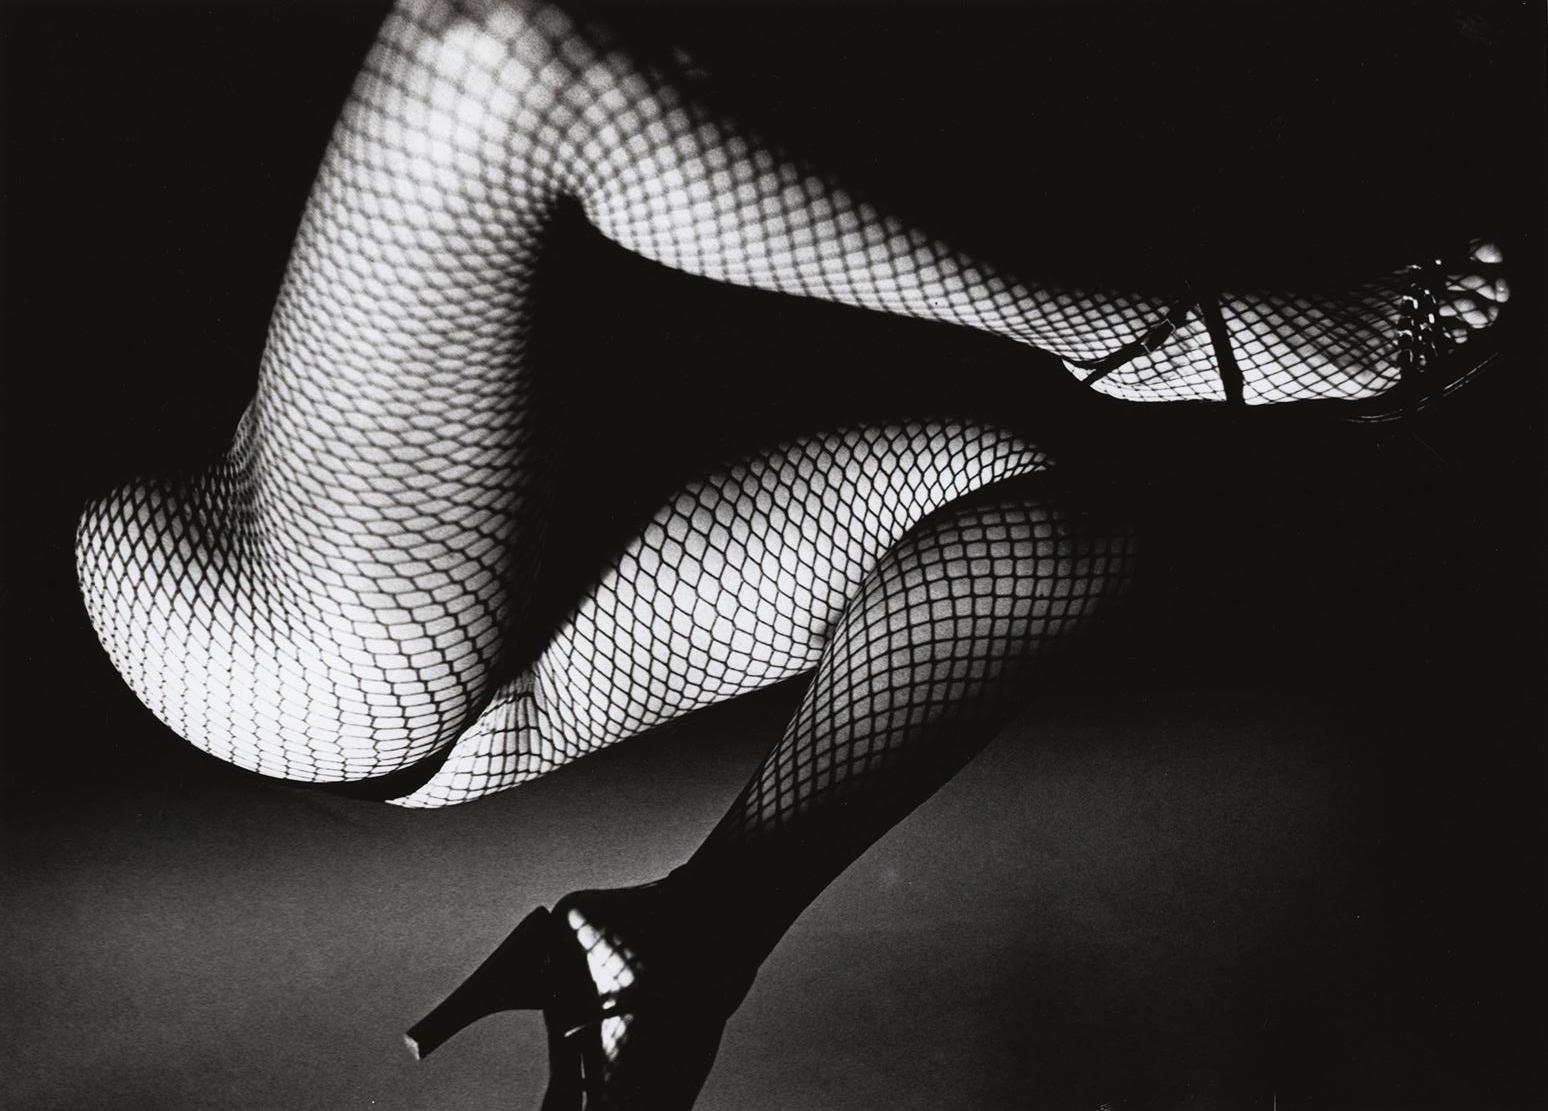 Fernando Natalici 'Tamara Exotica' 1981: 
An anonymous female form seductively twists within the darkness of the frame illuminated just slightly by an unknown source. Featuring black heels and fishnets this high contrast black and white darkroom